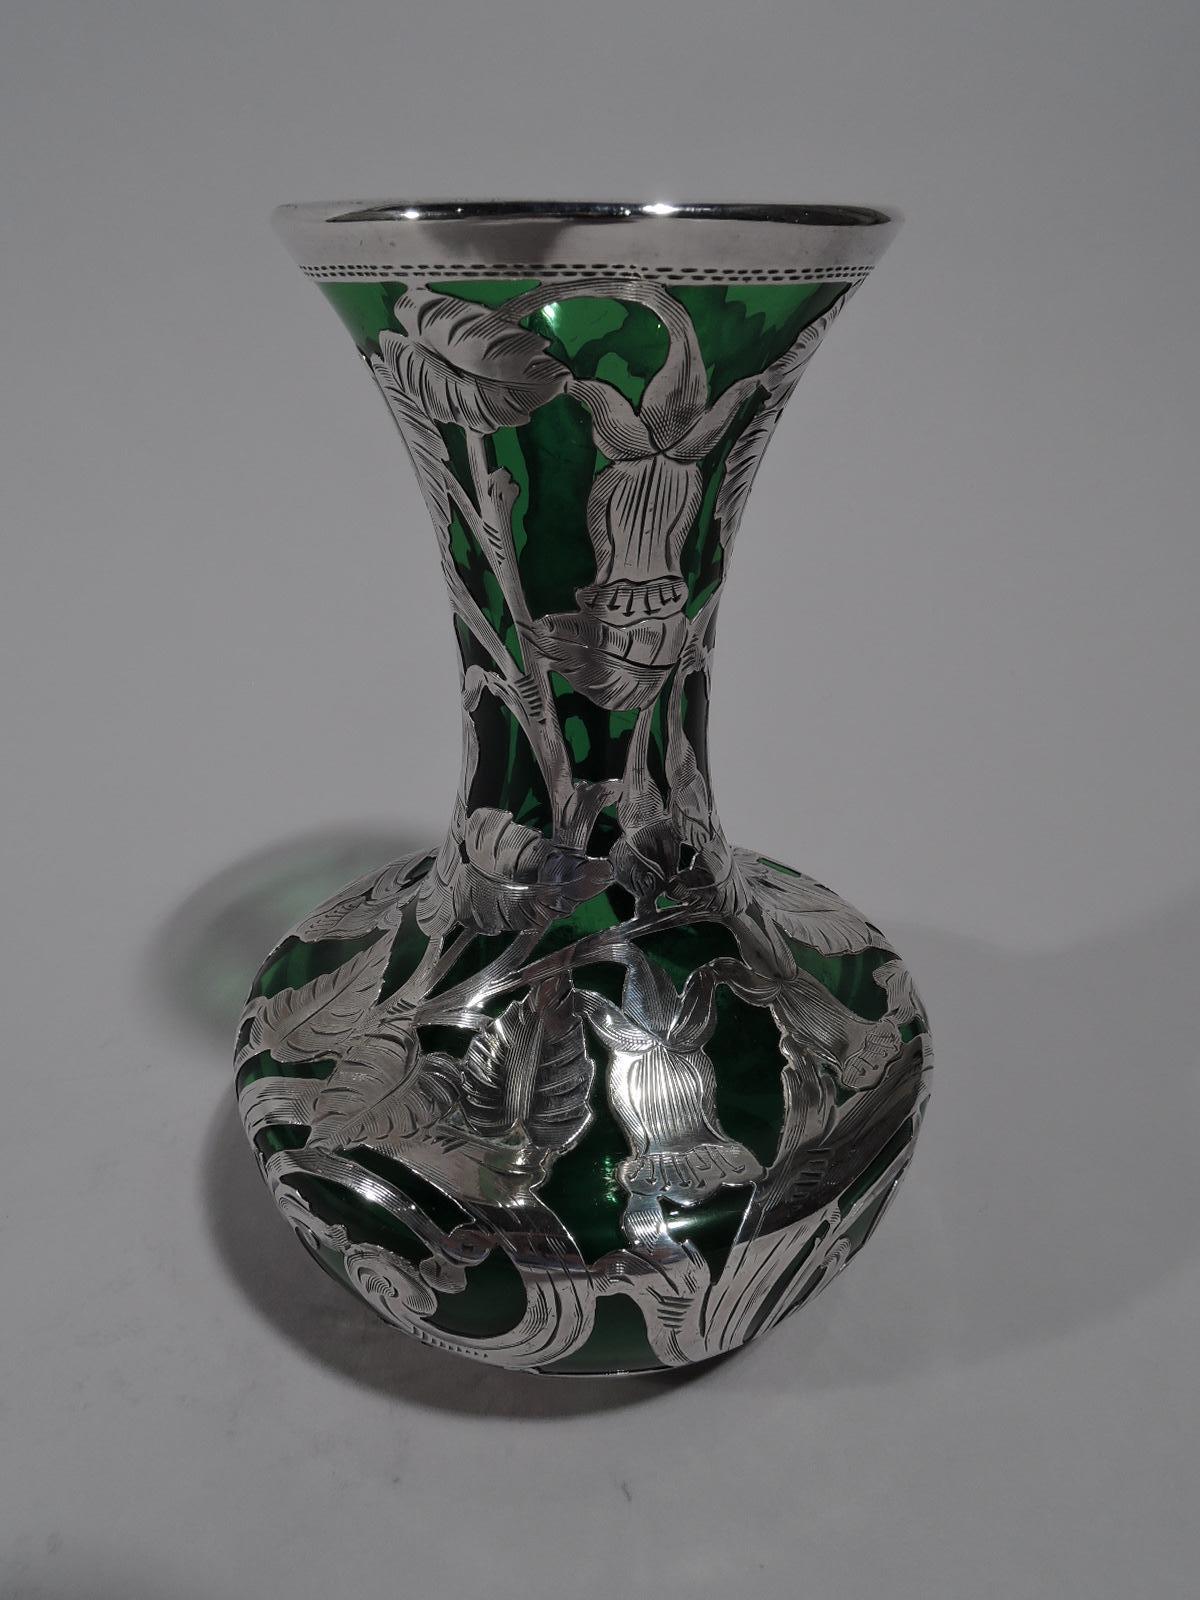 Turn of the century Art Nouveau green glass vase with silver overlay. Made by Alvin in Providence. Bellied bowl with flared cylindrical neck. Flowers, leaves, and scrolls in dense overlay heightened with engraving. Fully marked and numbered G3452.